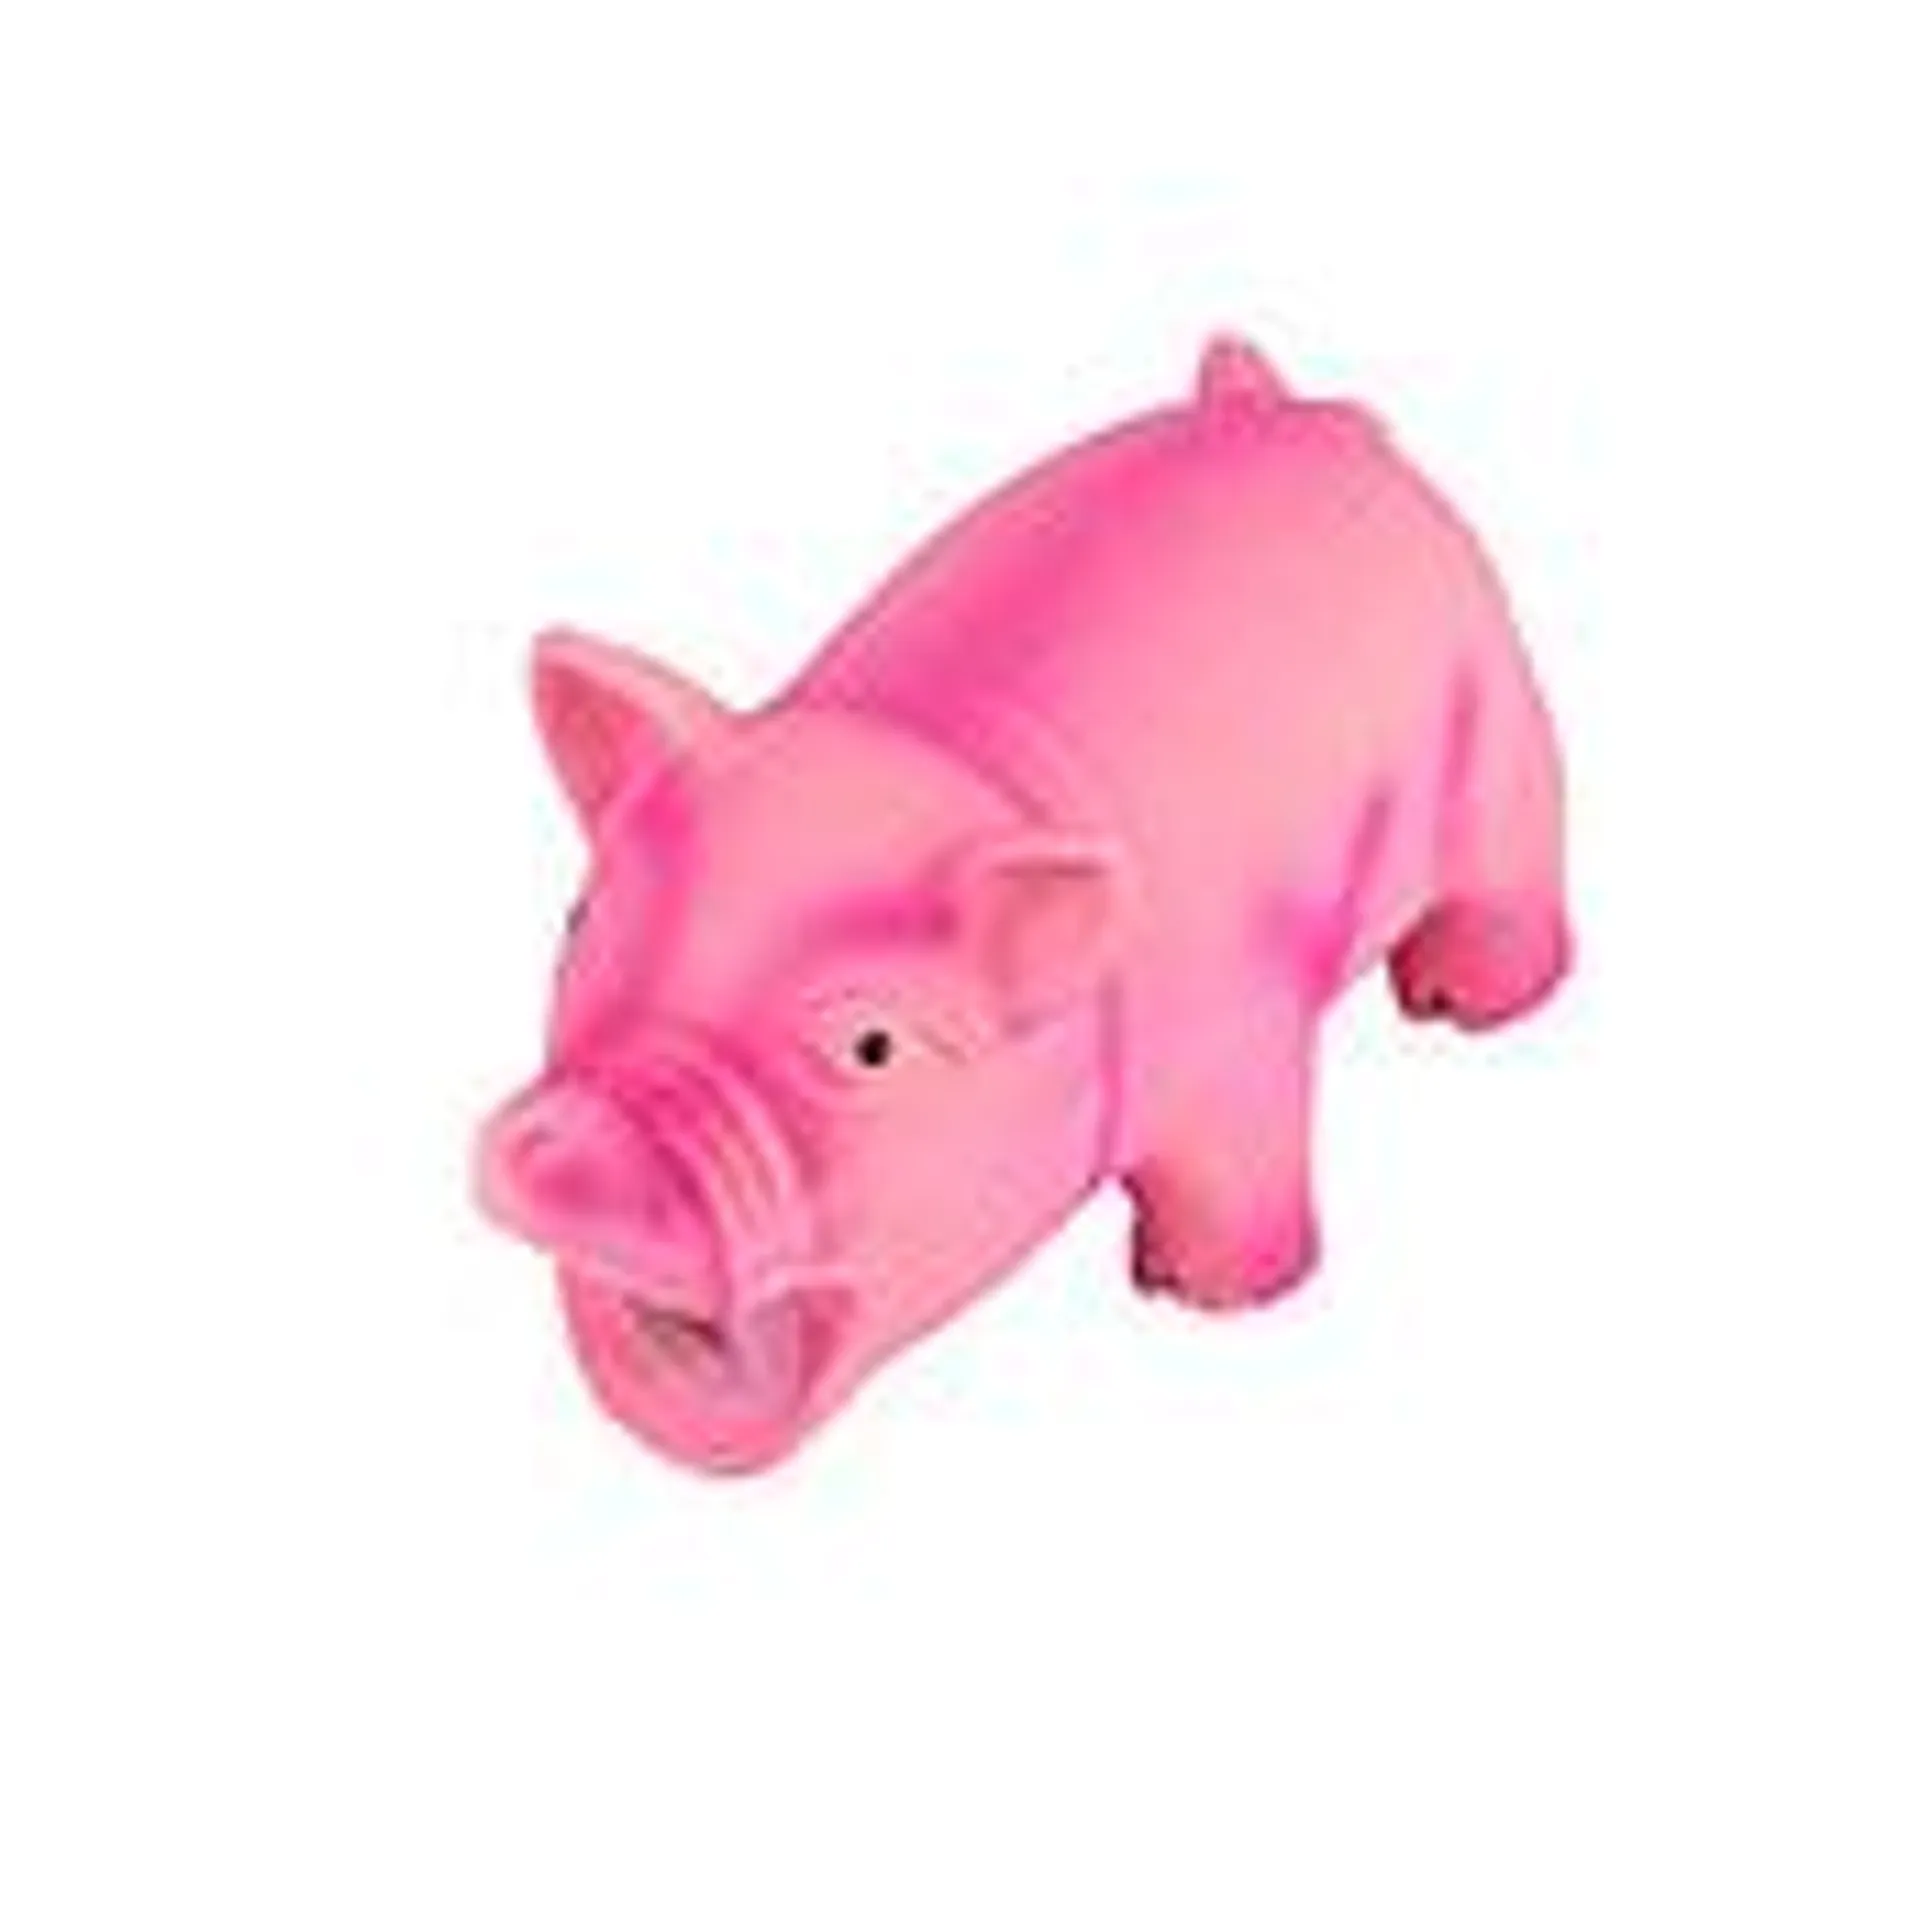 Pets at Home Oink Oink Piggy Dog Toy Small